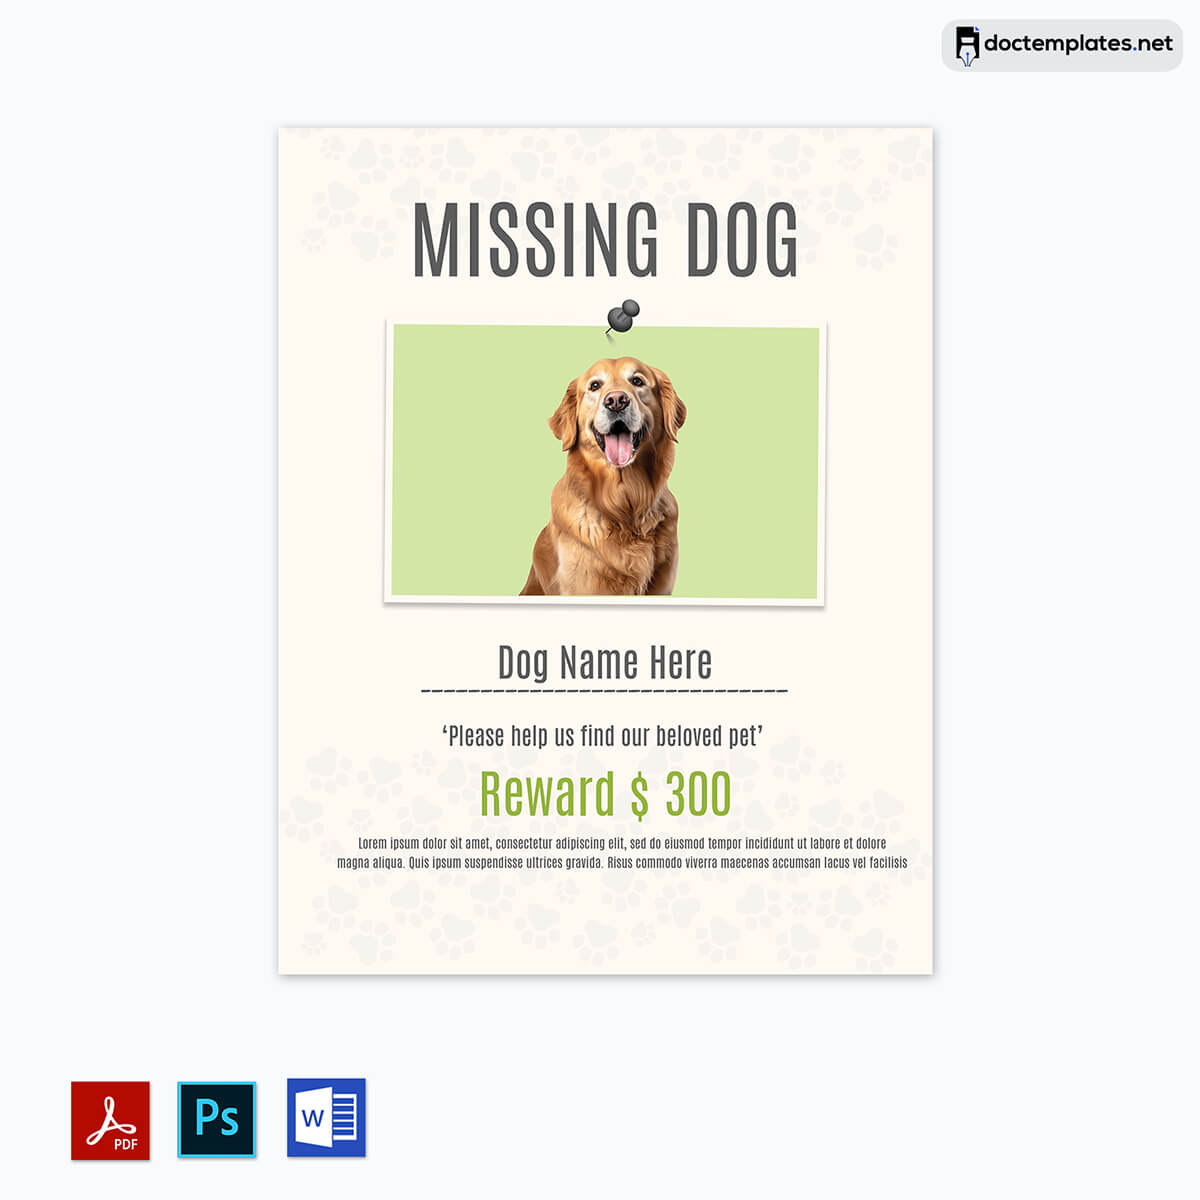 "Design with Adobe Illustrator" - Design a professional lost pet flyer for cats and dogs using Adobe Illustrator.